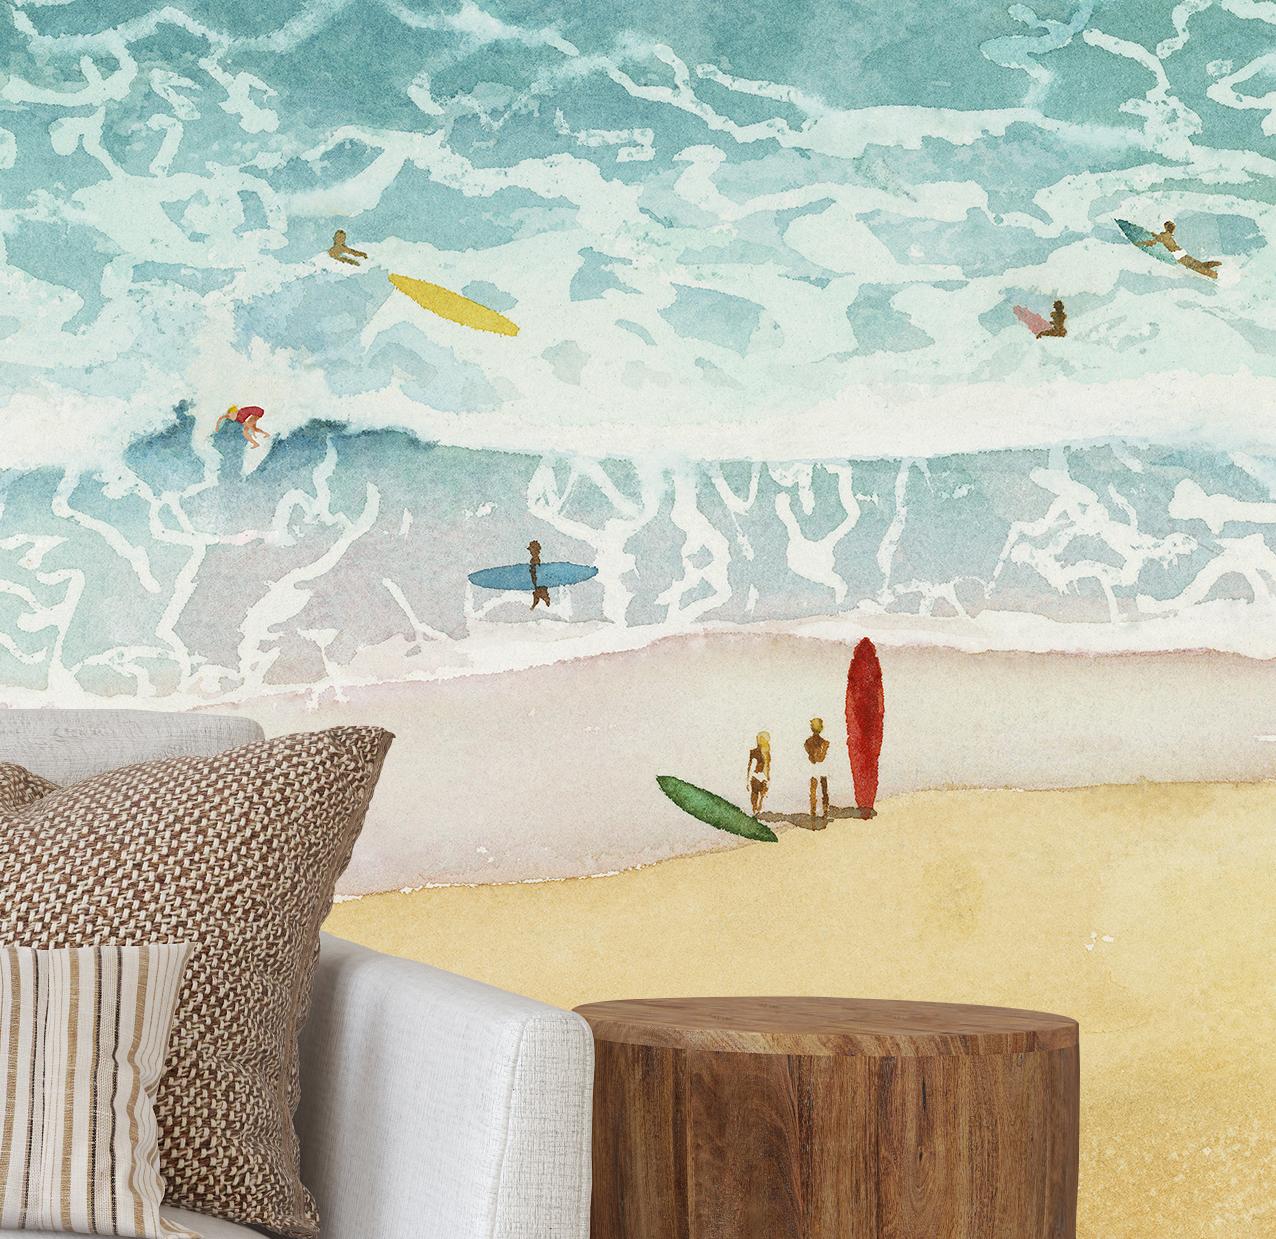 All our products are custom made. The price per square meter is 91$. The price shown is for a 350cm wide by 250cm high wall

Marion Bartherotte sublimates the atmosphere of surfing in a passionate panoramic setting. This model is like a huge